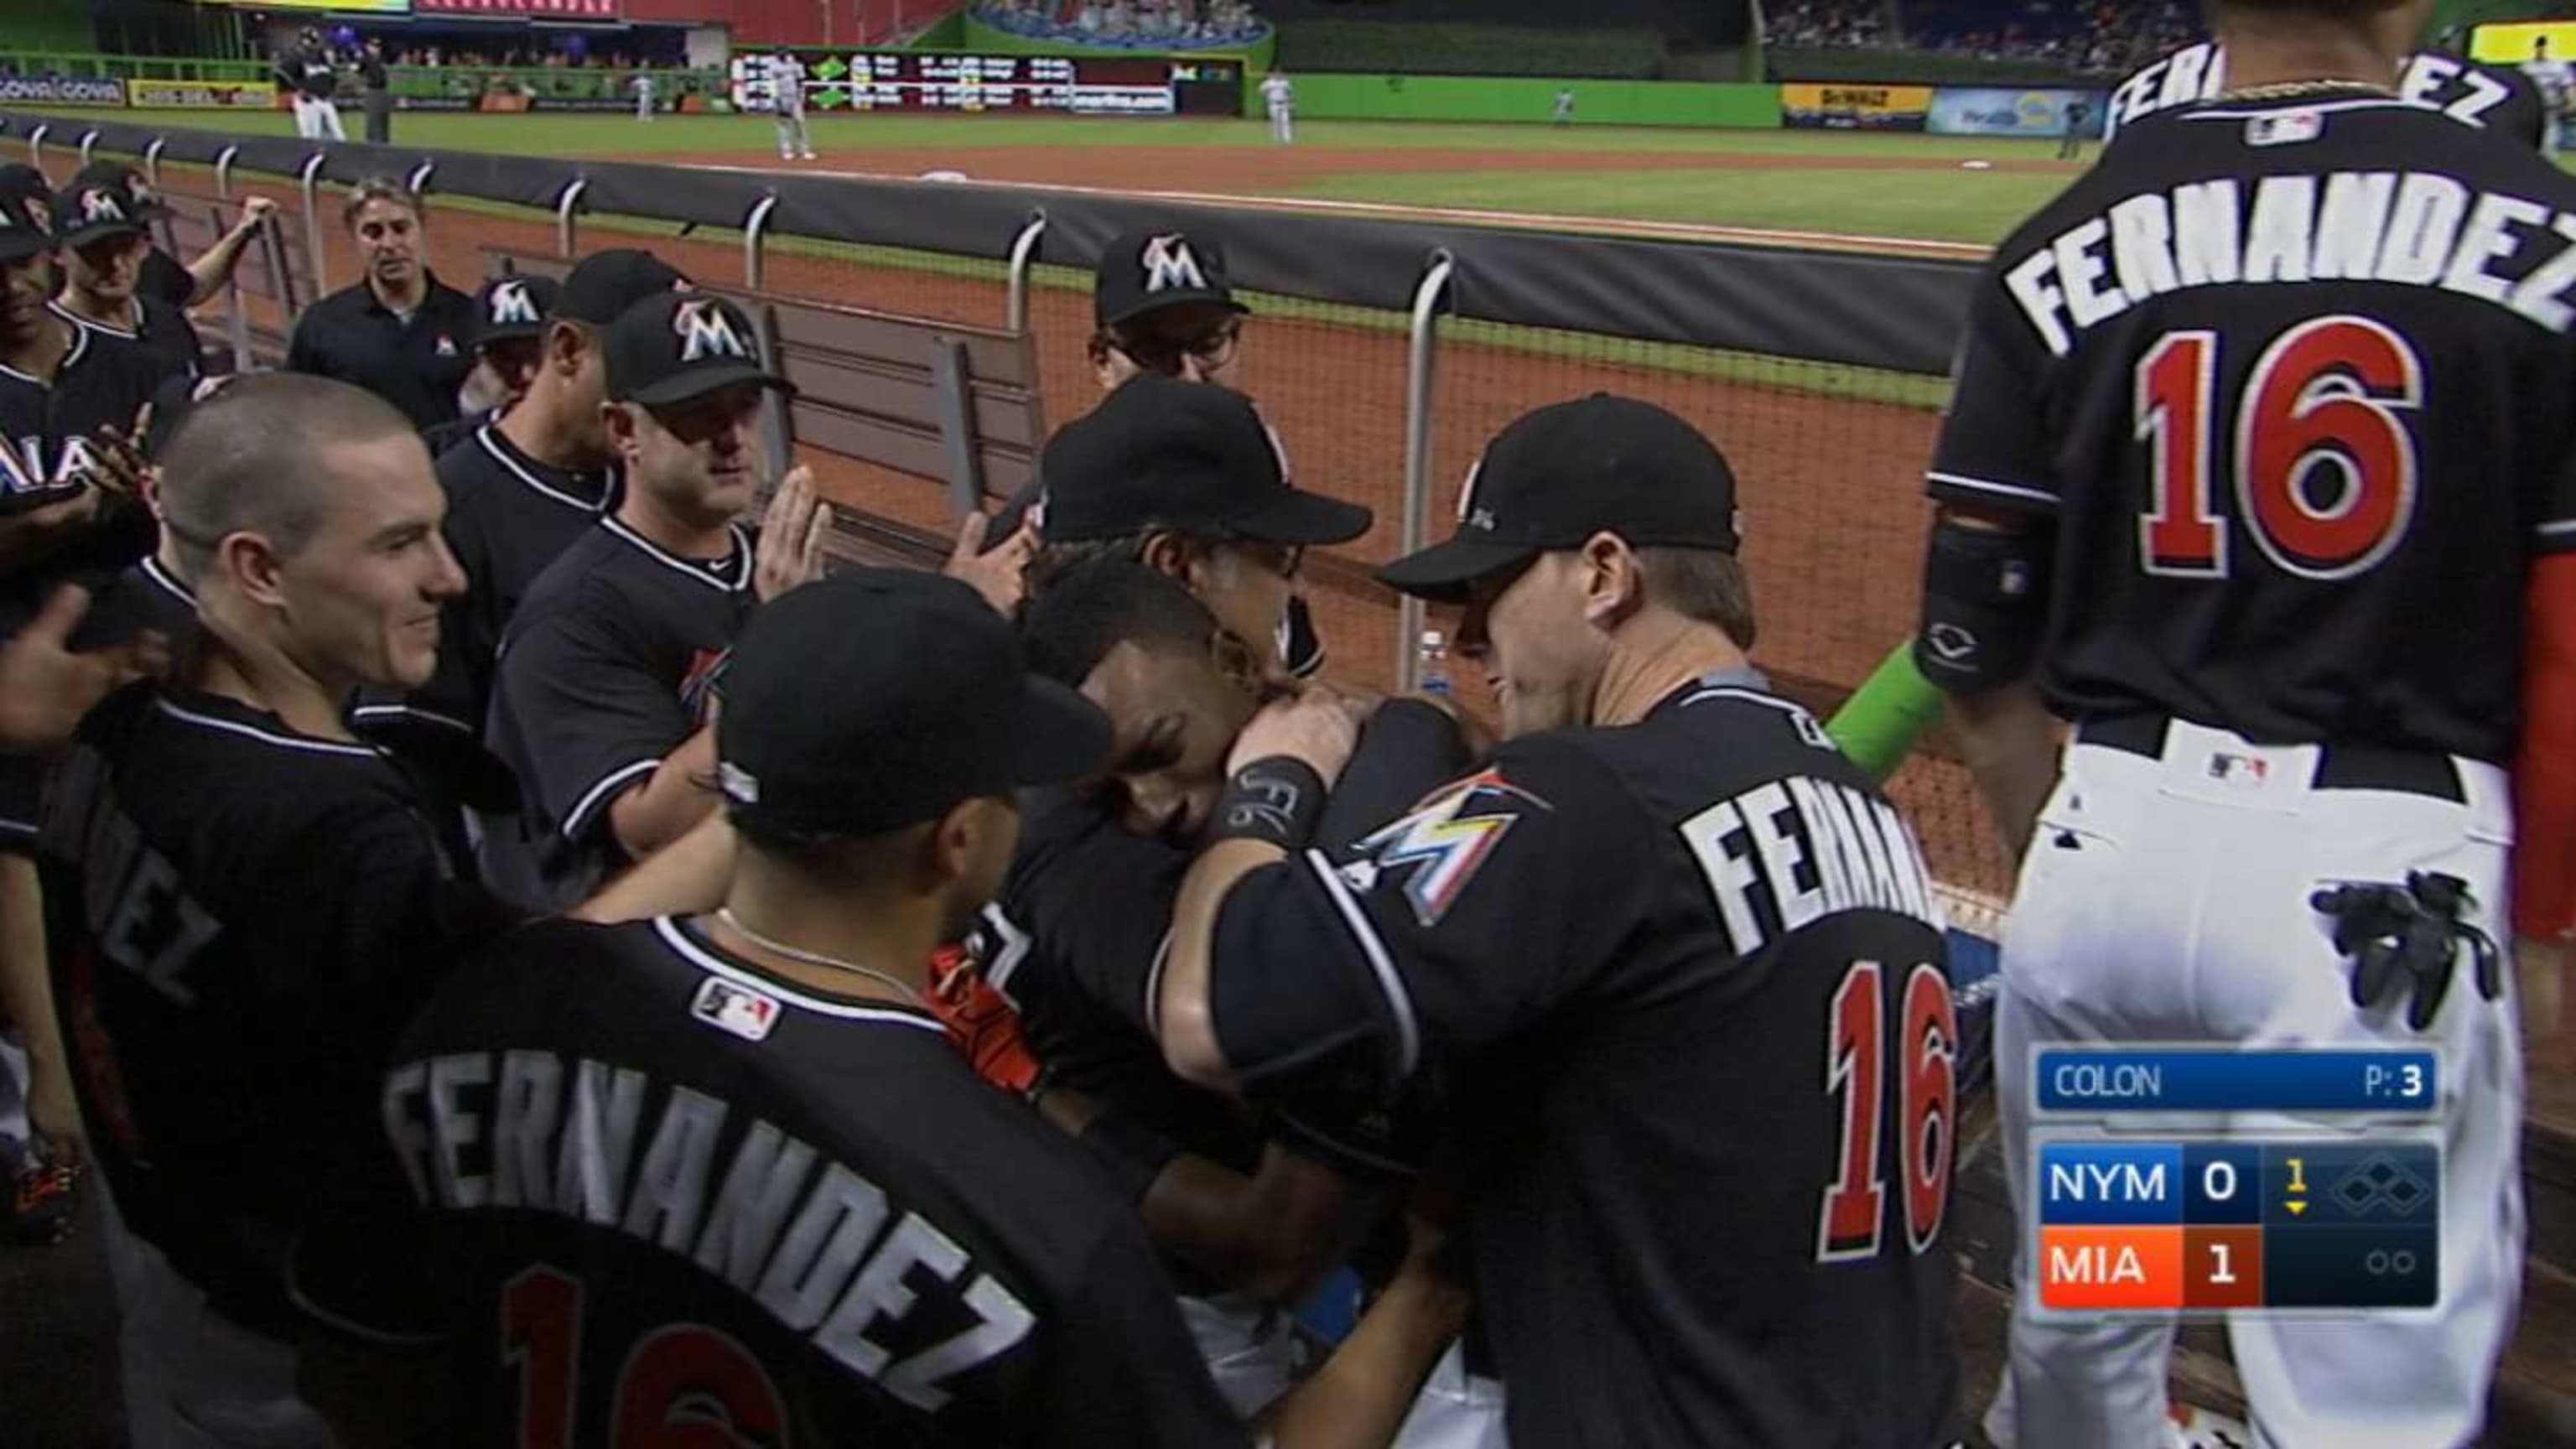 Gordon homers leading off as Marlins mourn Fernandez - WSVN 7News, Miami  News, Weather, Sports